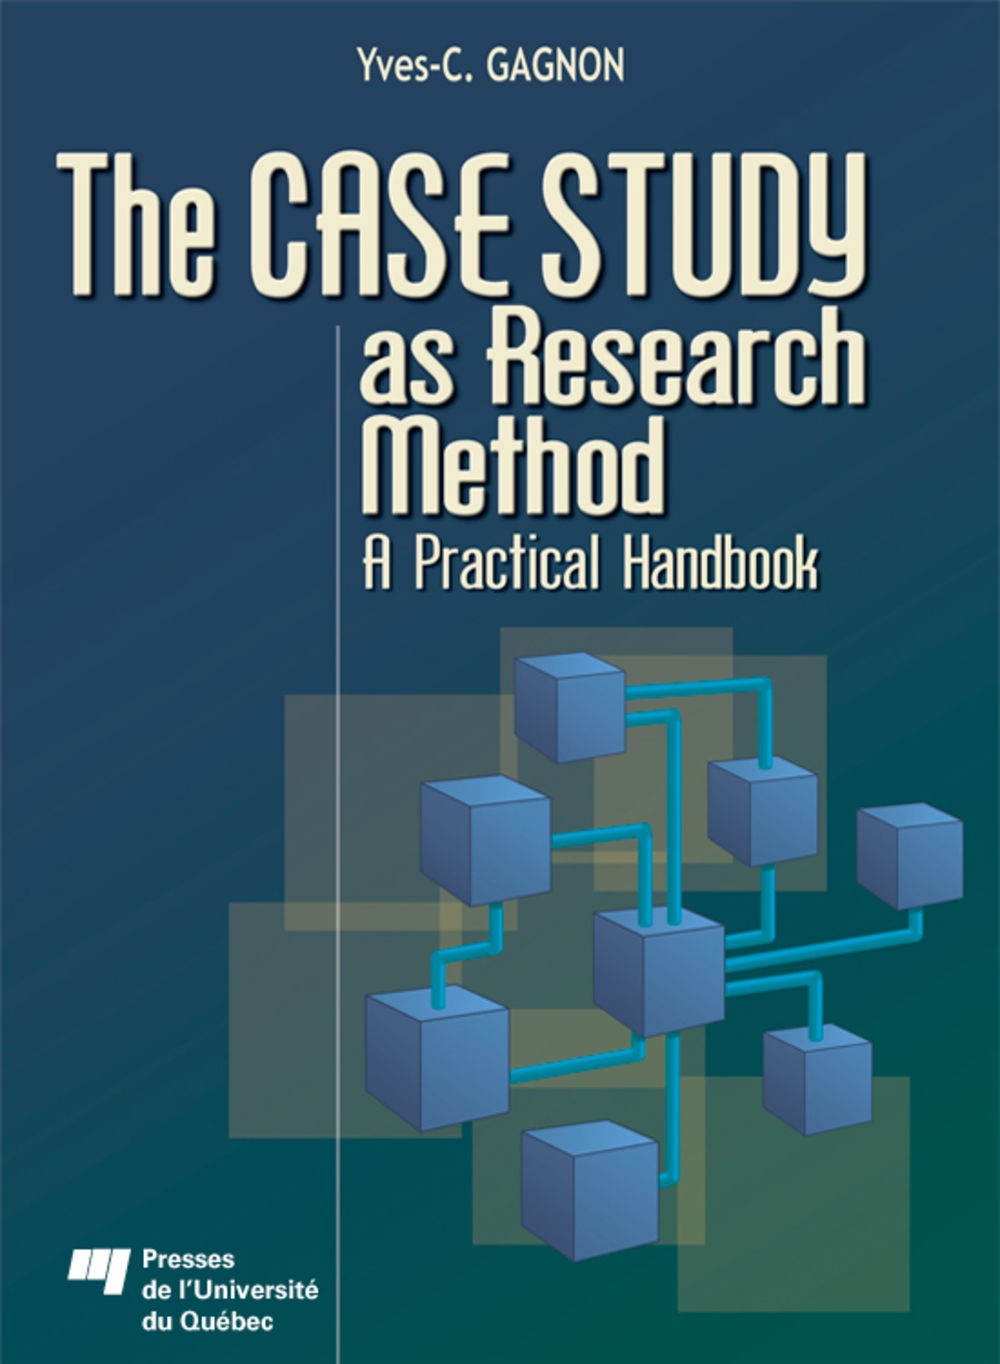 father of case study method